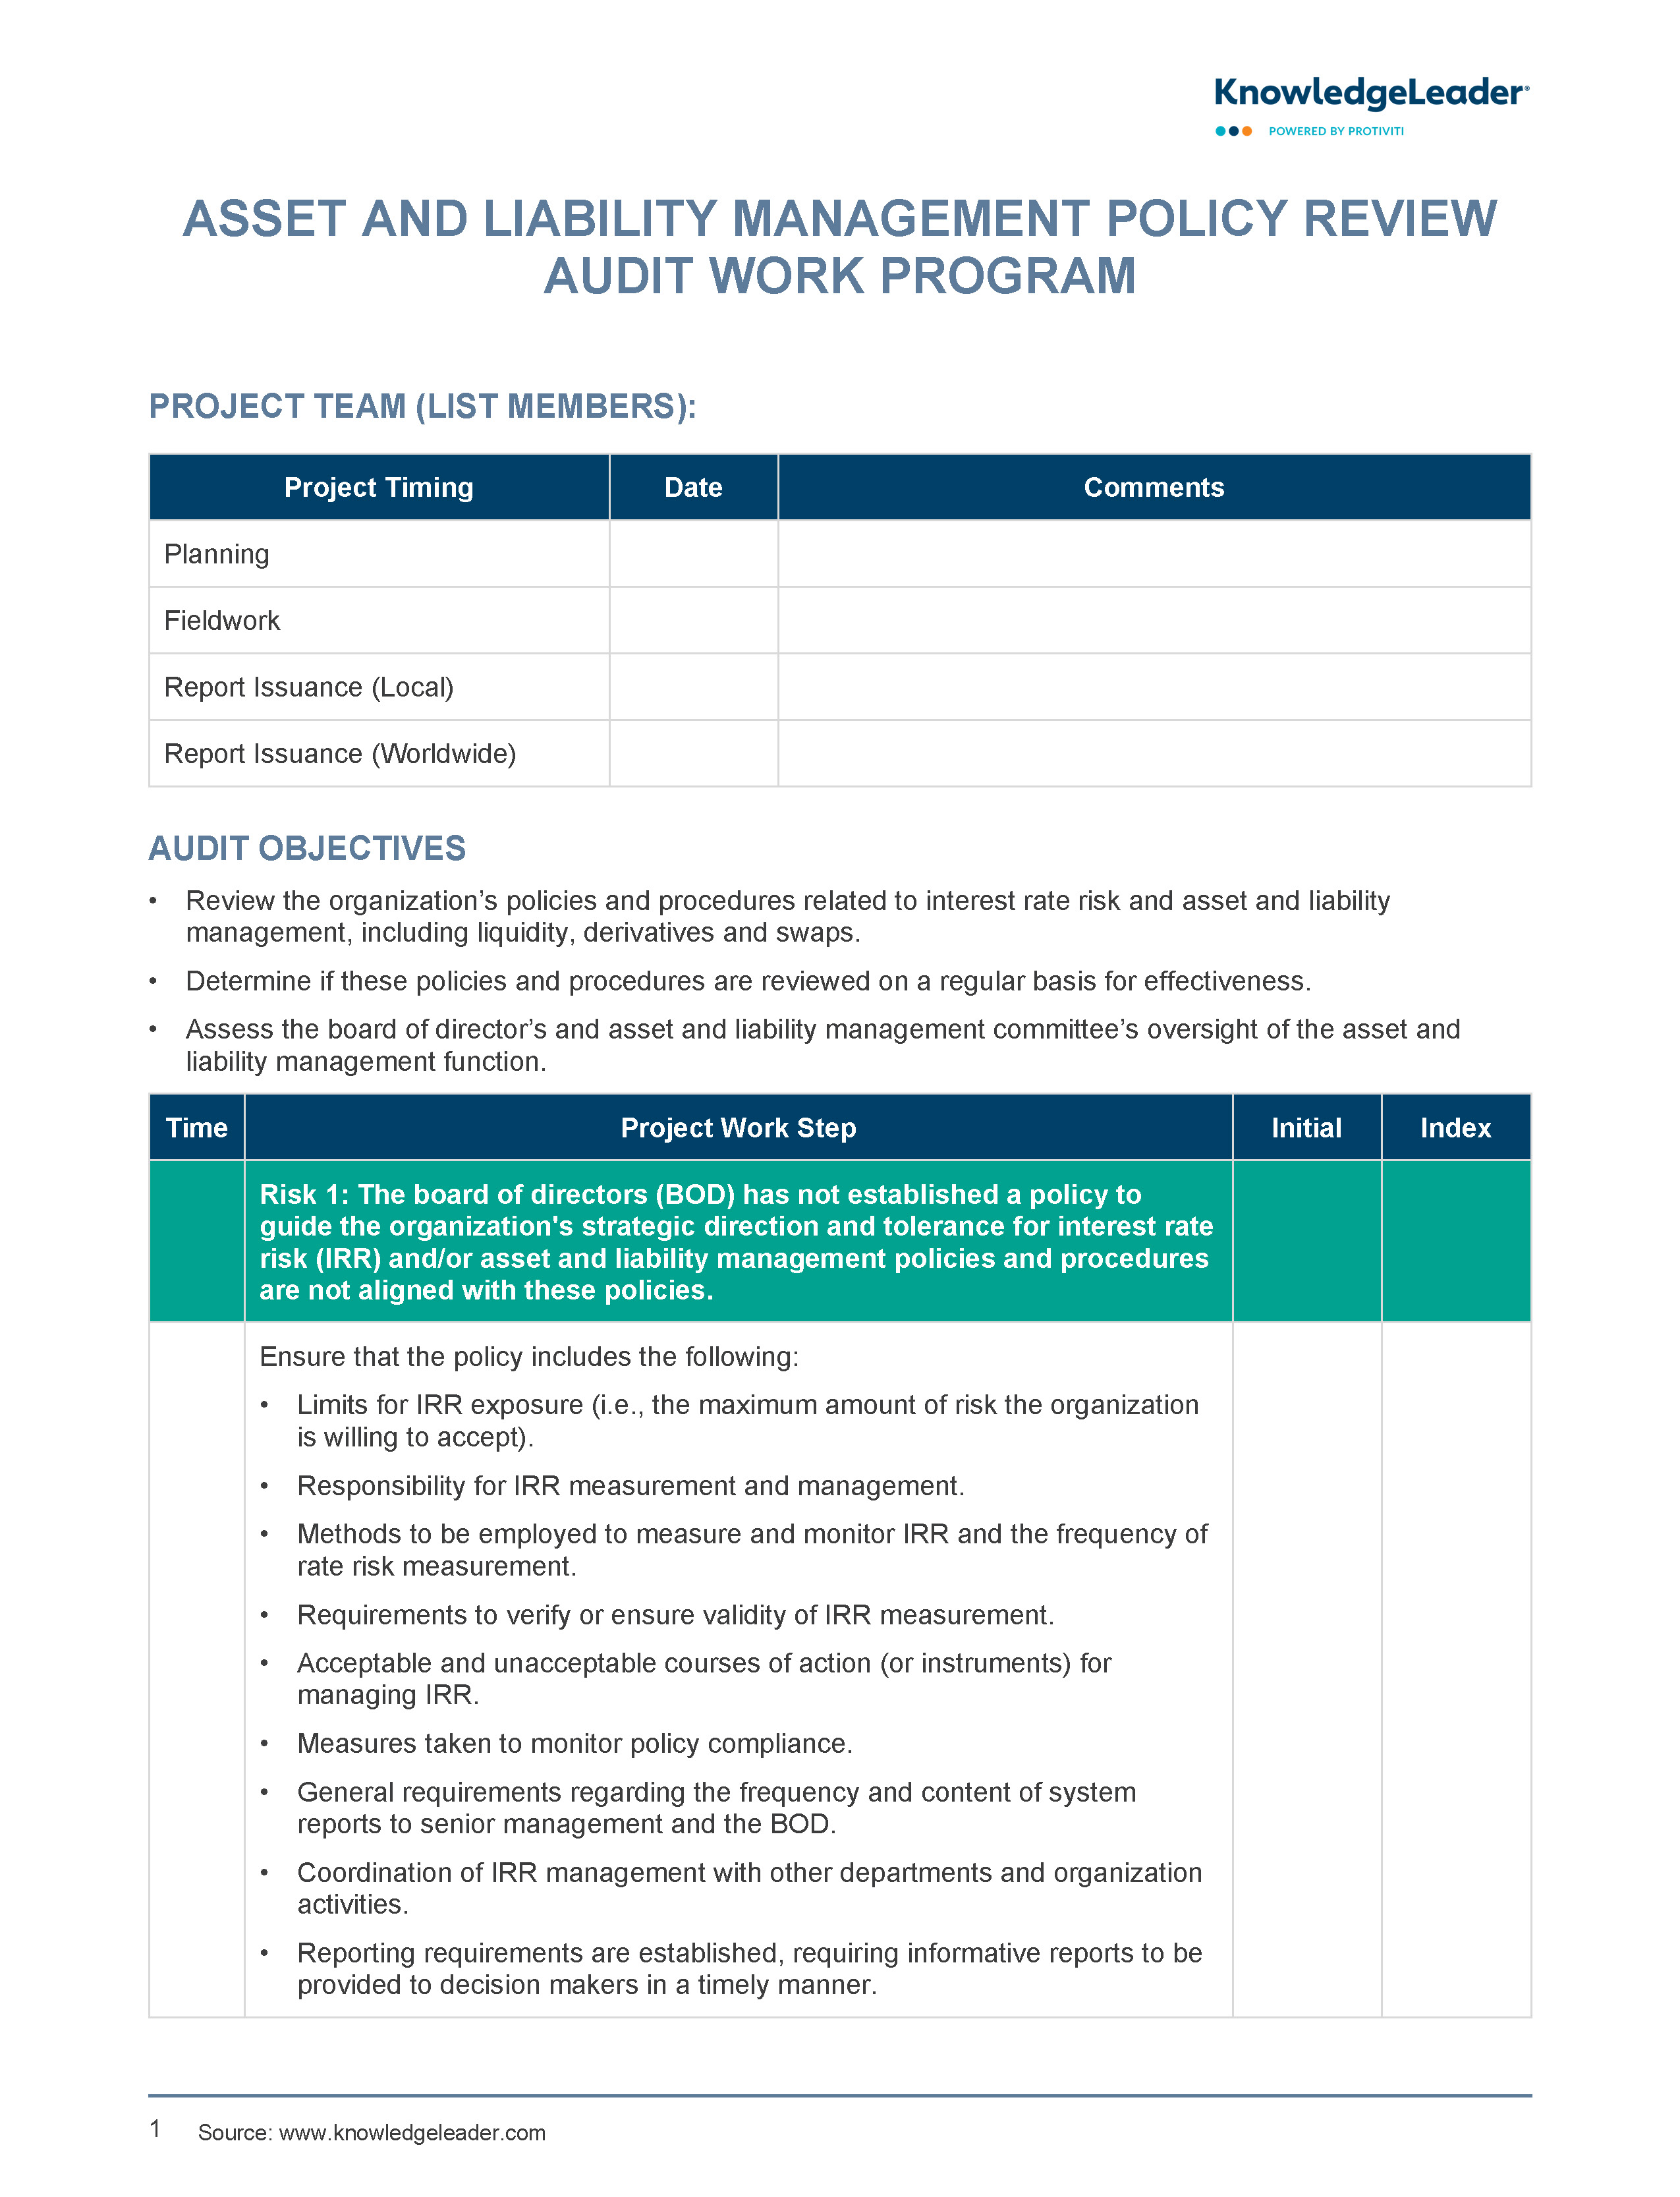 Screenshot of the first page of Asset and Liability Management Policy Review Audit Work Program